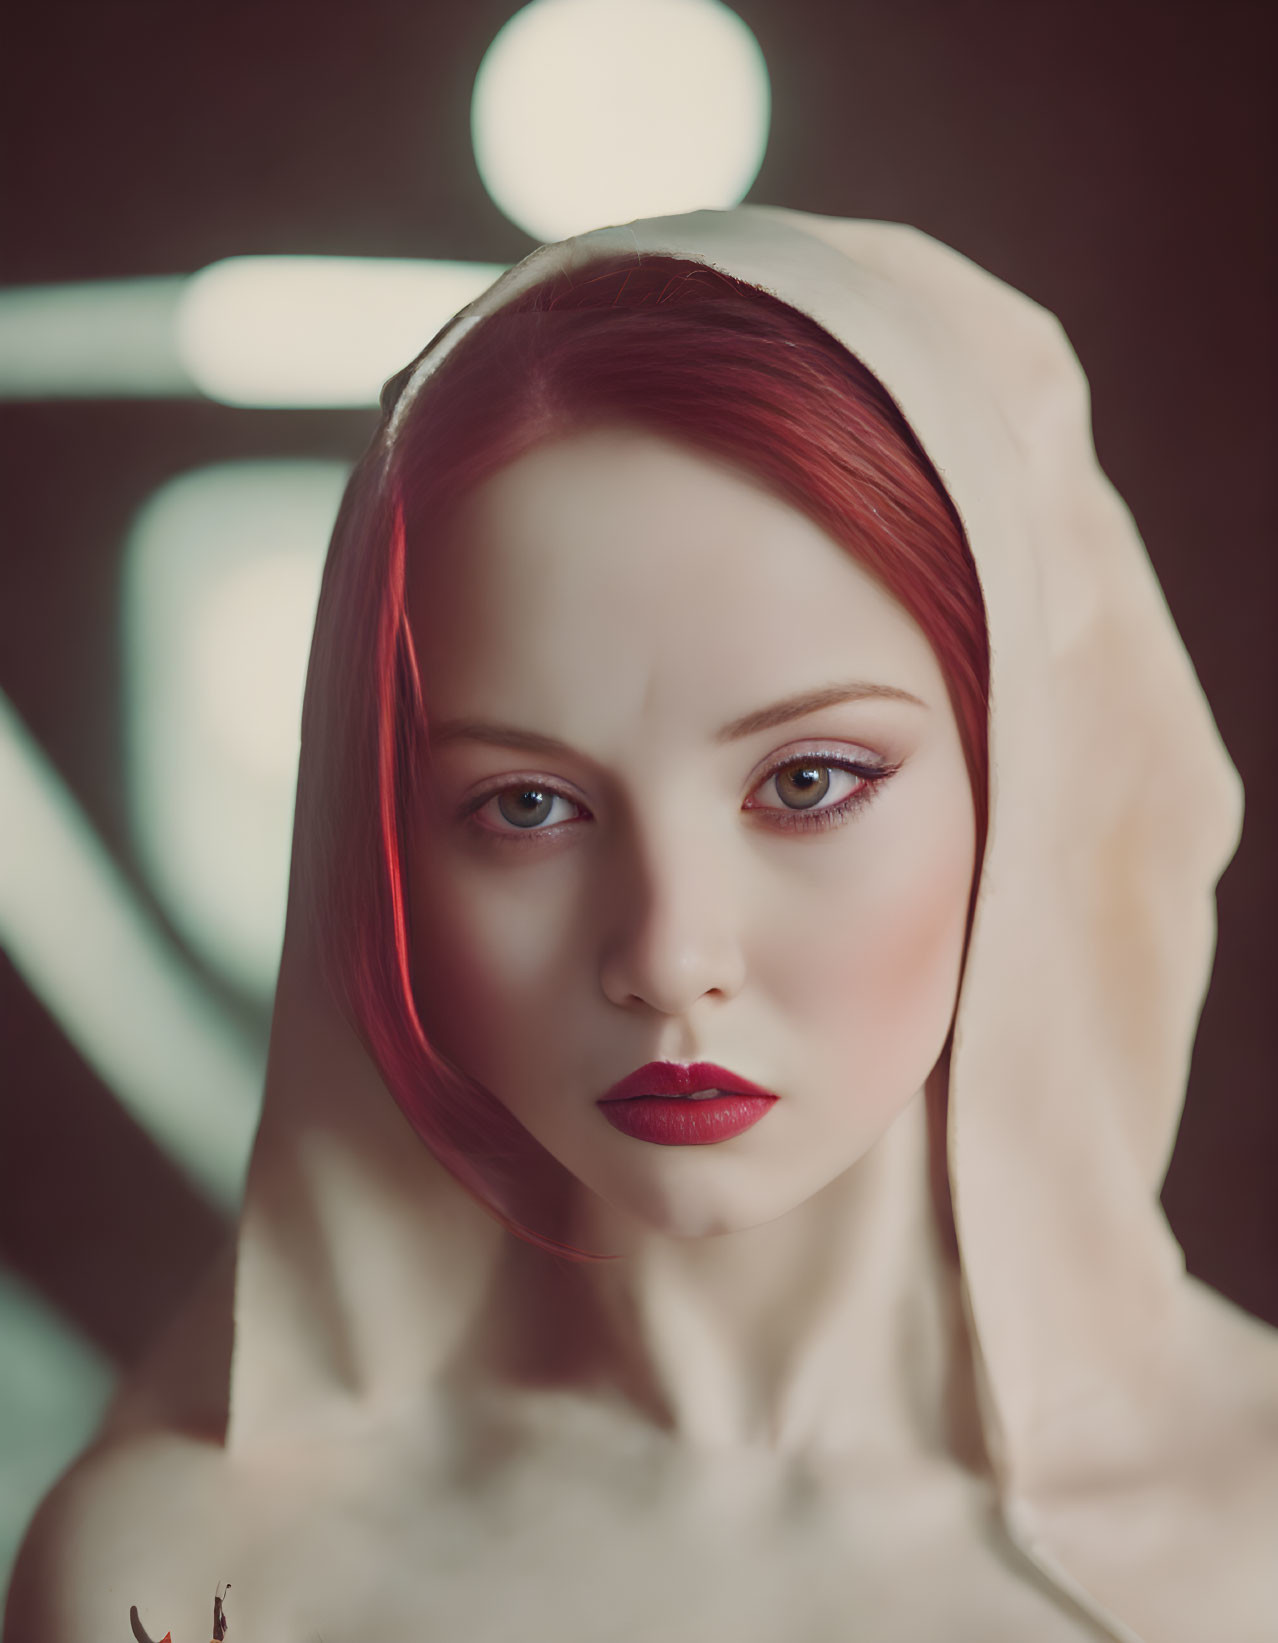 Intense woman with red hair and cream headscarf staring solemnly